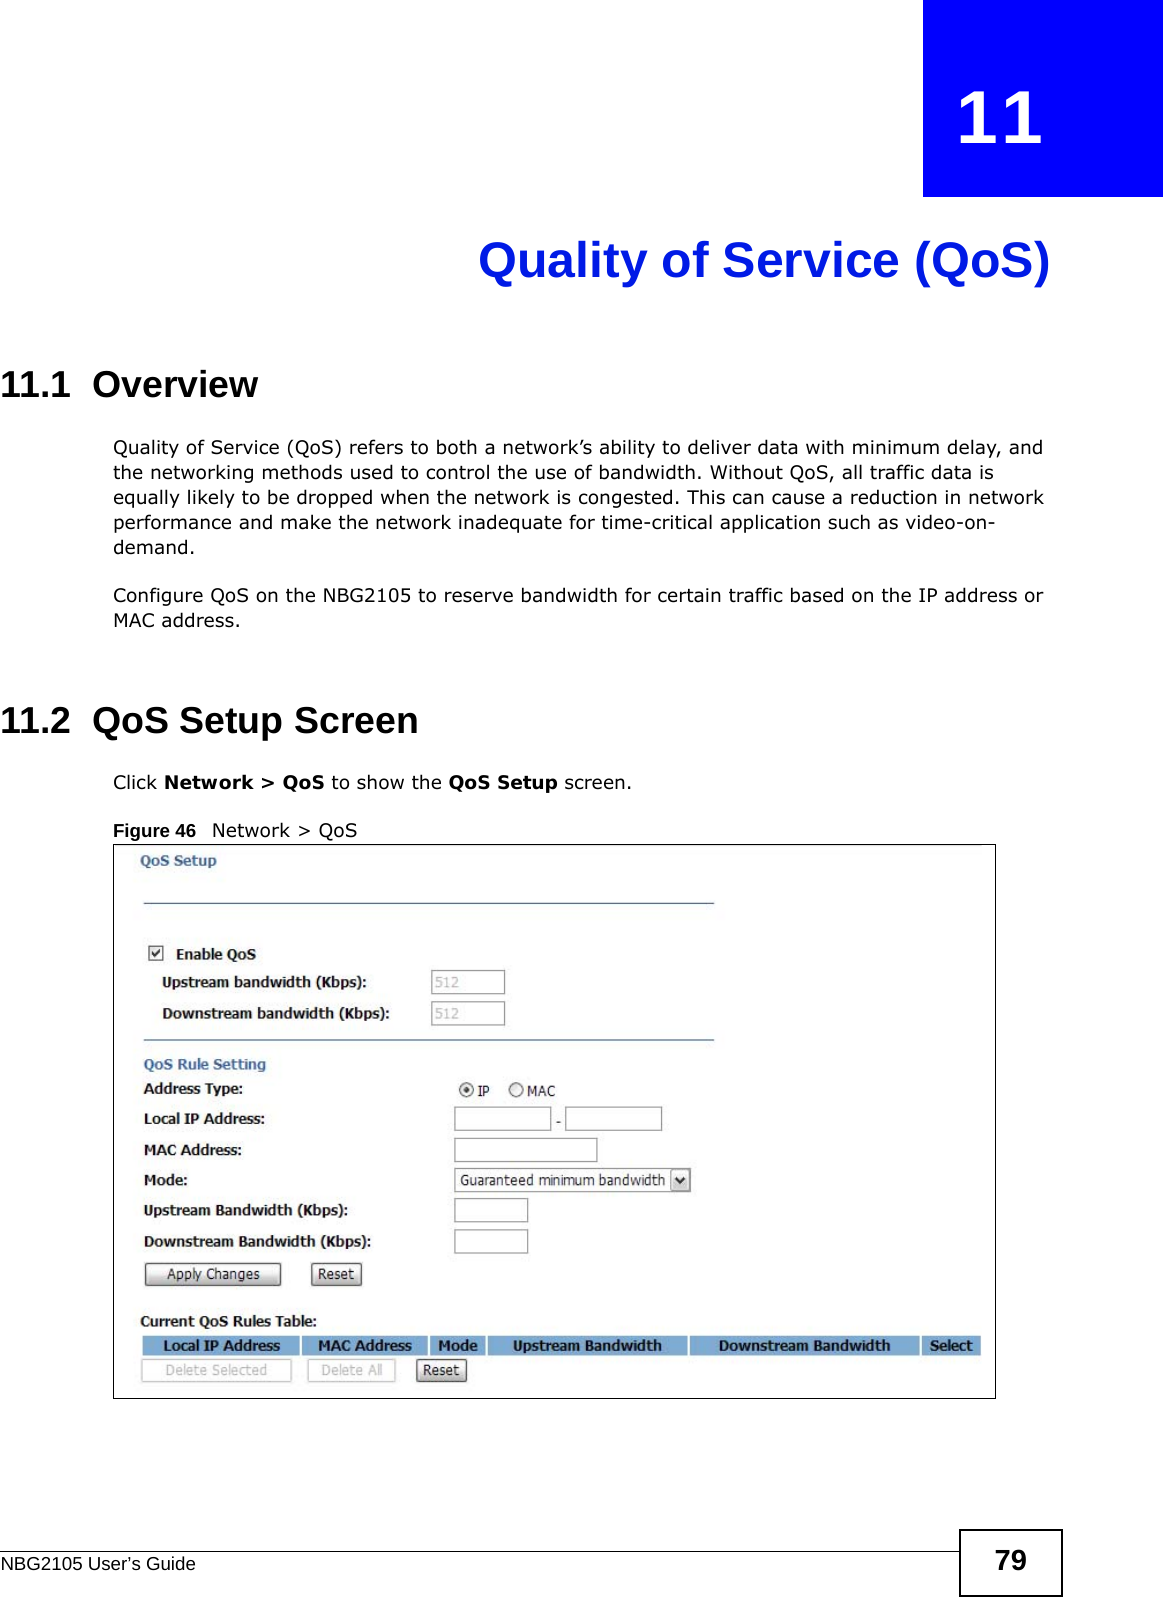 NBG2105 User’s Guide 79CHAPTER   11Quality of Service (QoS)11.1  Overview Quality of Service (QoS) refers to both a network’s ability to deliver data with minimum delay, and the networking methods used to control the use of bandwidth. Without QoS, all traffic data is equally likely to be dropped when the network is congested. This can cause a reduction in network performance and make the network inadequate for time-critical application such as video-on-demand.Configure QoS on the NBG2105 to reserve bandwidth for certain traffic based on the IP address or MAC address. 11.2  QoS Setup ScreenClick Network &gt; QoS to show the QoS Setup screen.Figure 46   Network &gt; QoS 